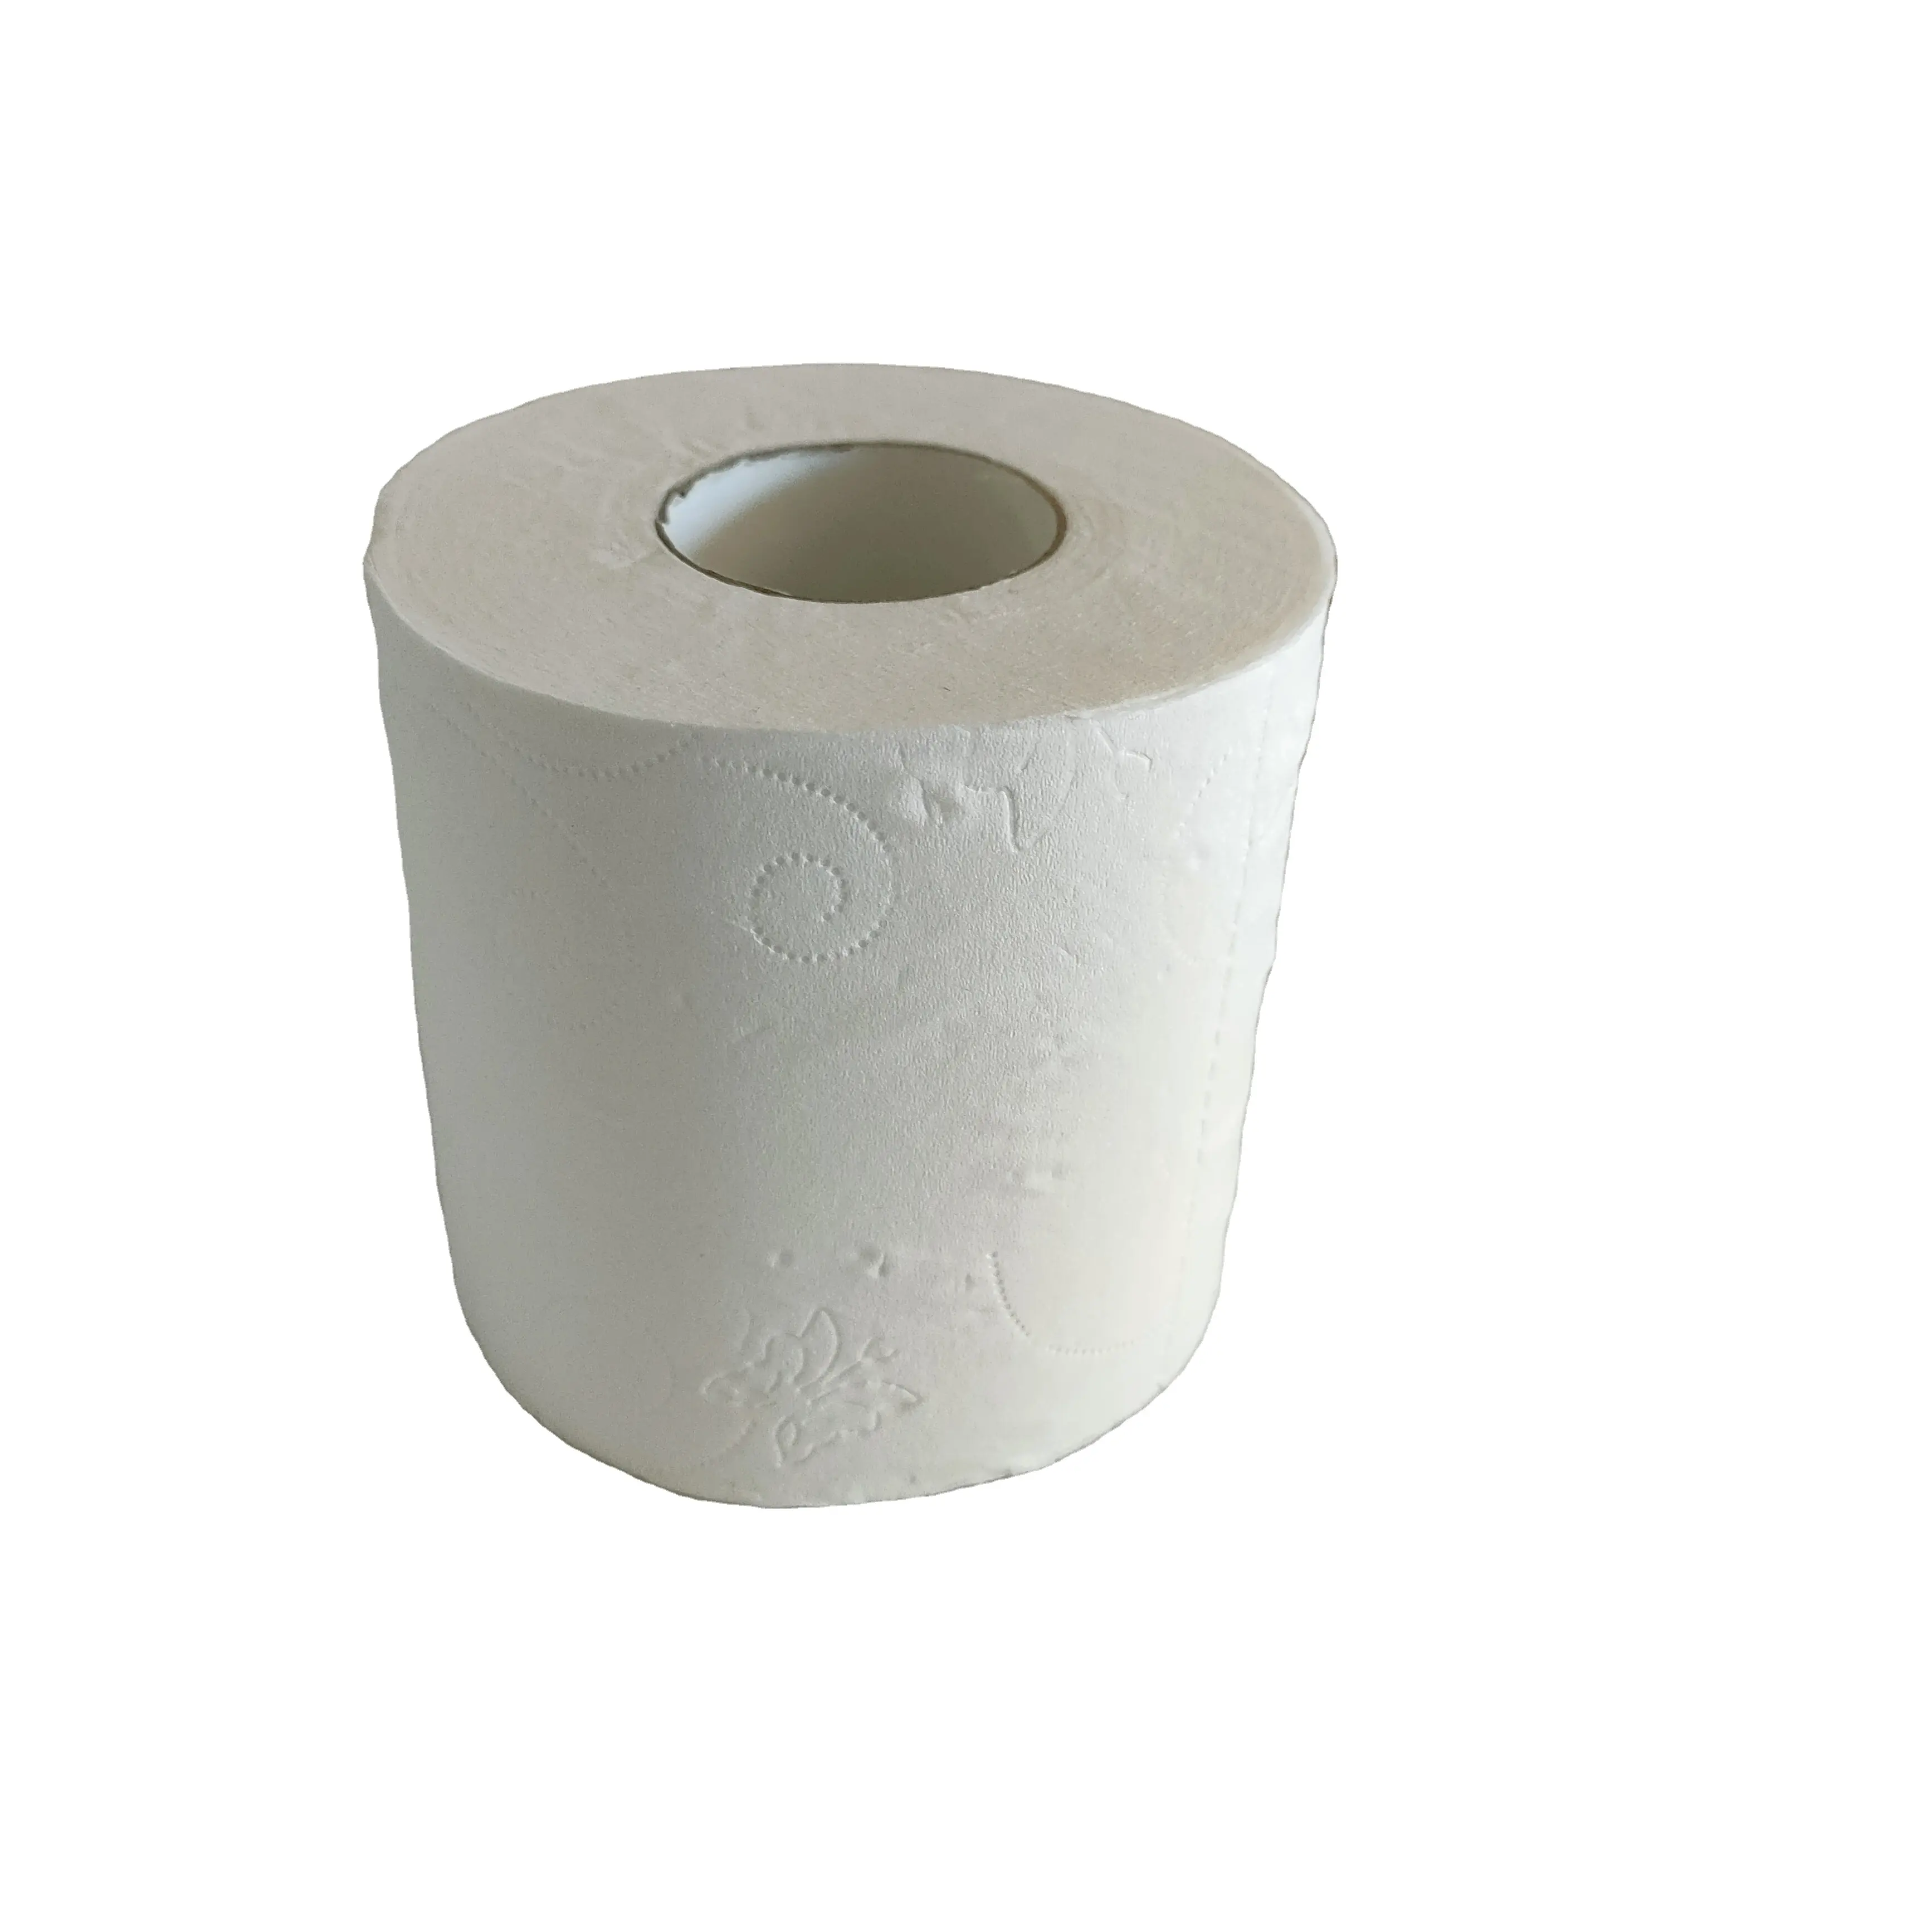 Wholesaler Cheap Manufacturer Tissue Roll Bamboo 3ply White Colored Manufacturers Toilet Tissue Paper 12 Bag Or Customized